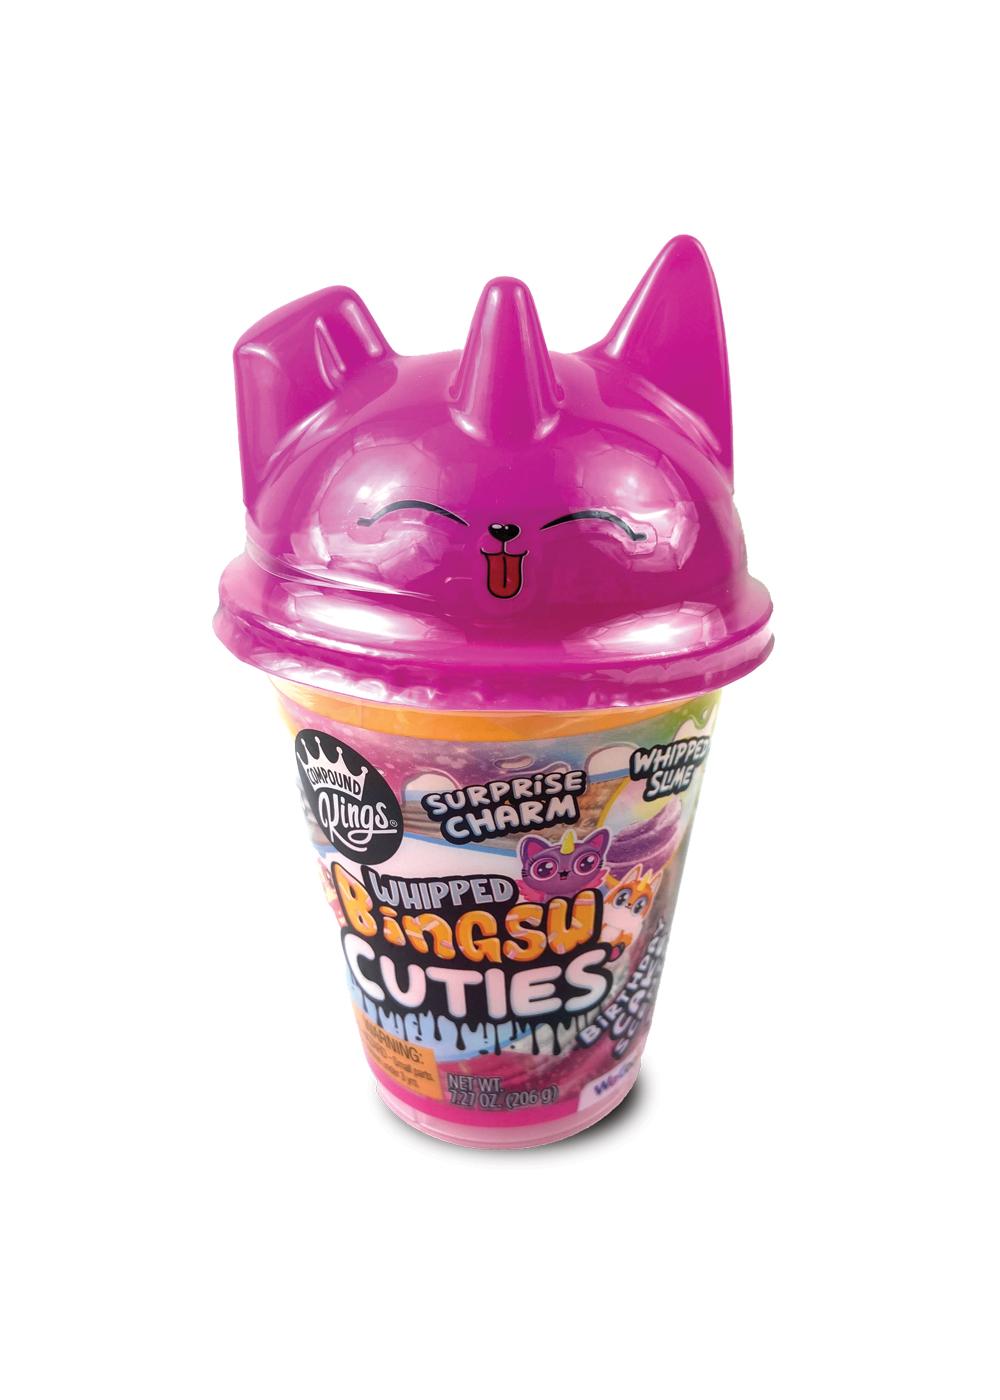 Compound Kings Whipped Bingsu Cuties Scented Slime, Assorted; image 2 of 2